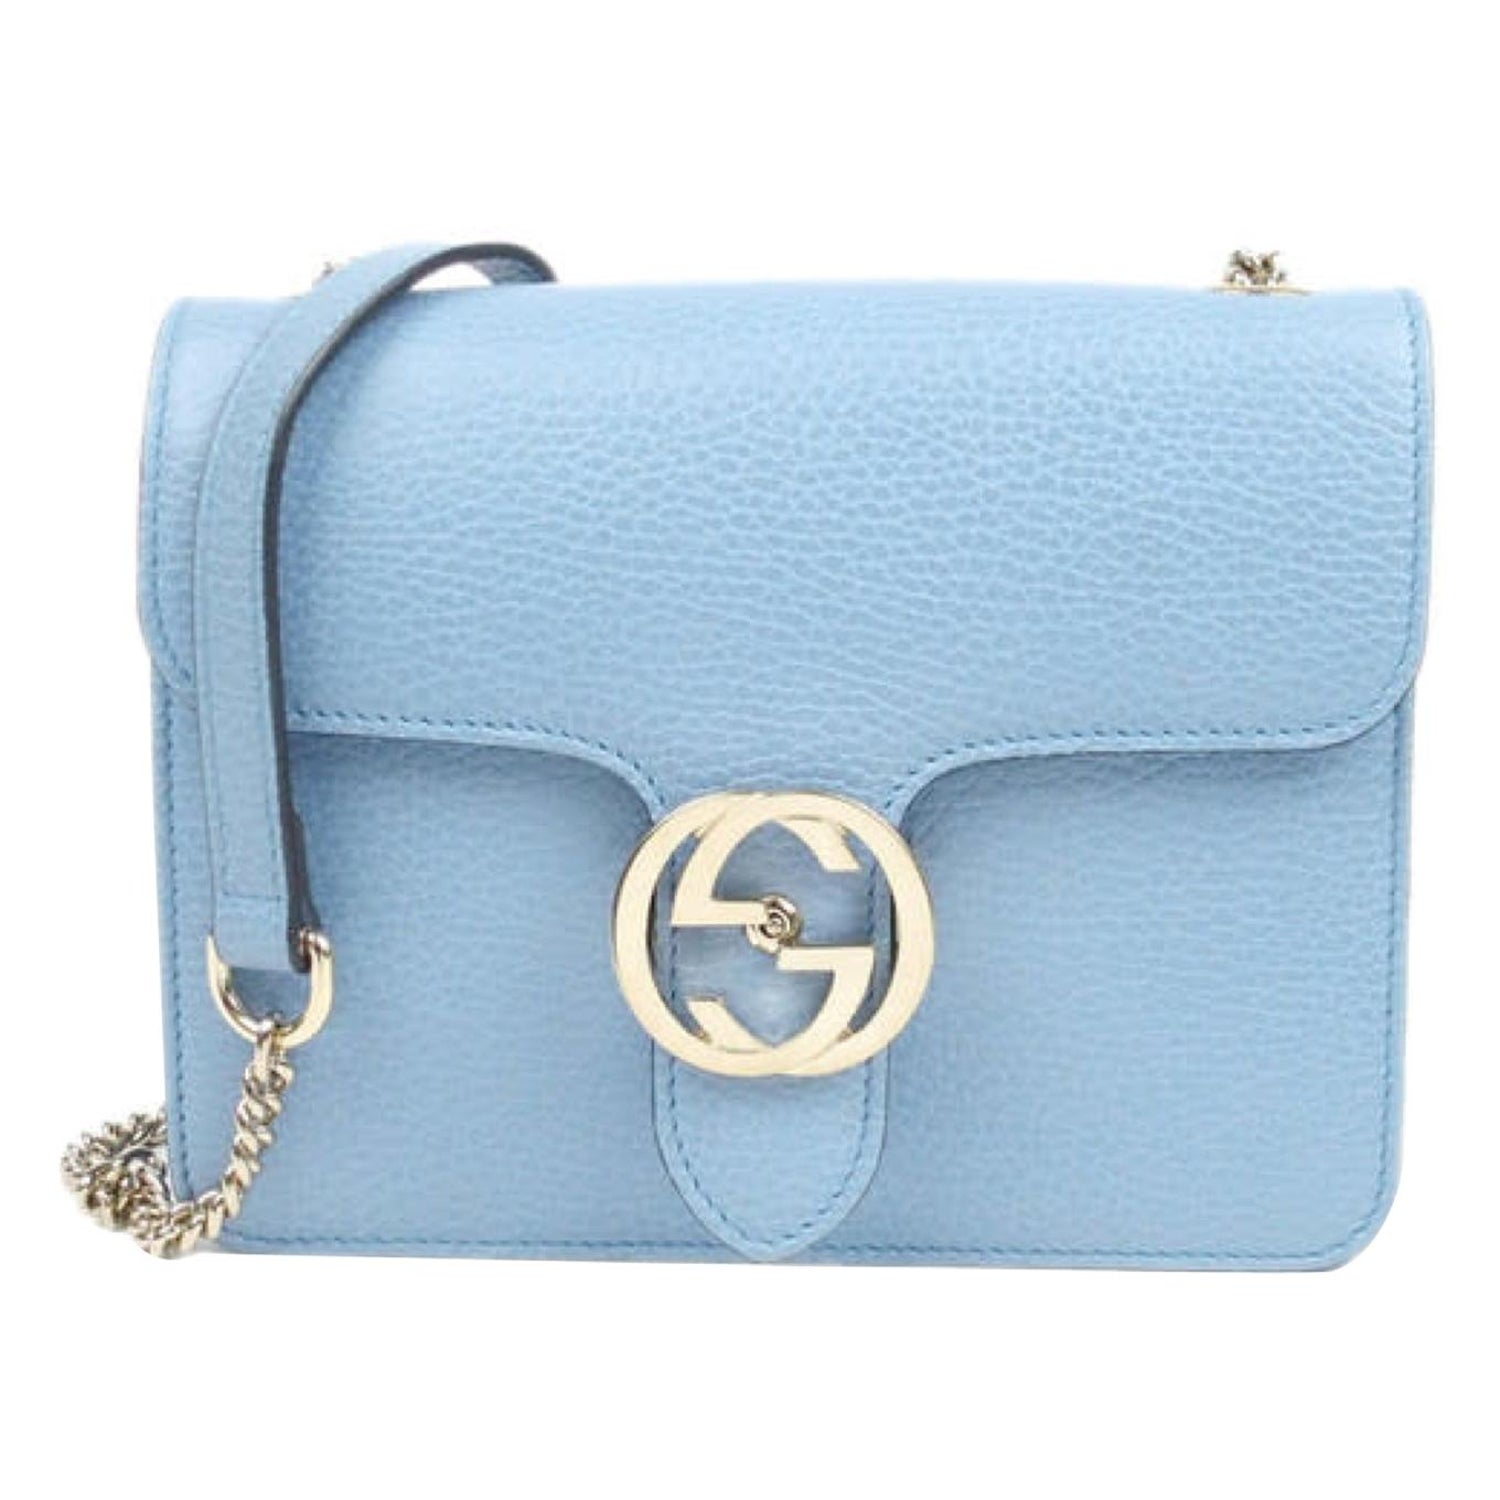 Baby Blue Gucci Bag - 2 For Sale on 1stDibs